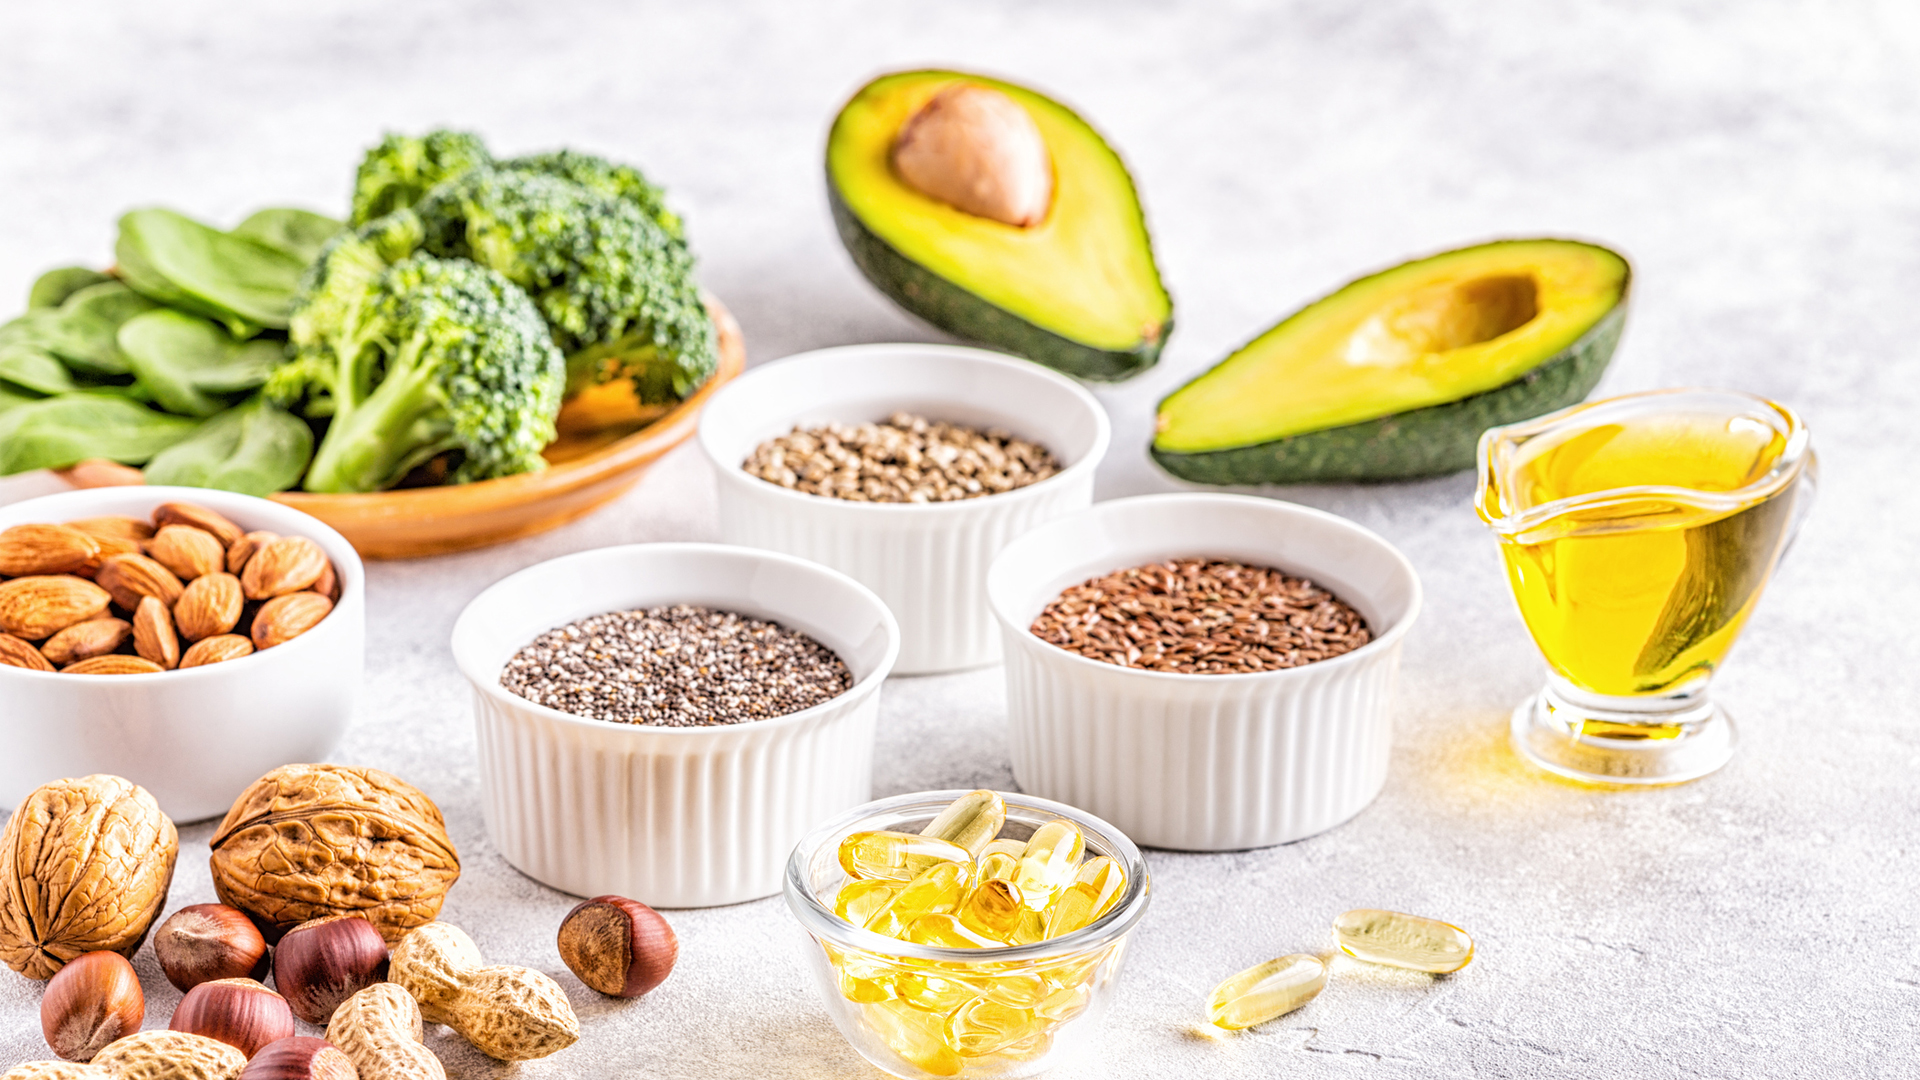 healthy sources of unsaturated fat including olive oil, nuts, seeds and avocado